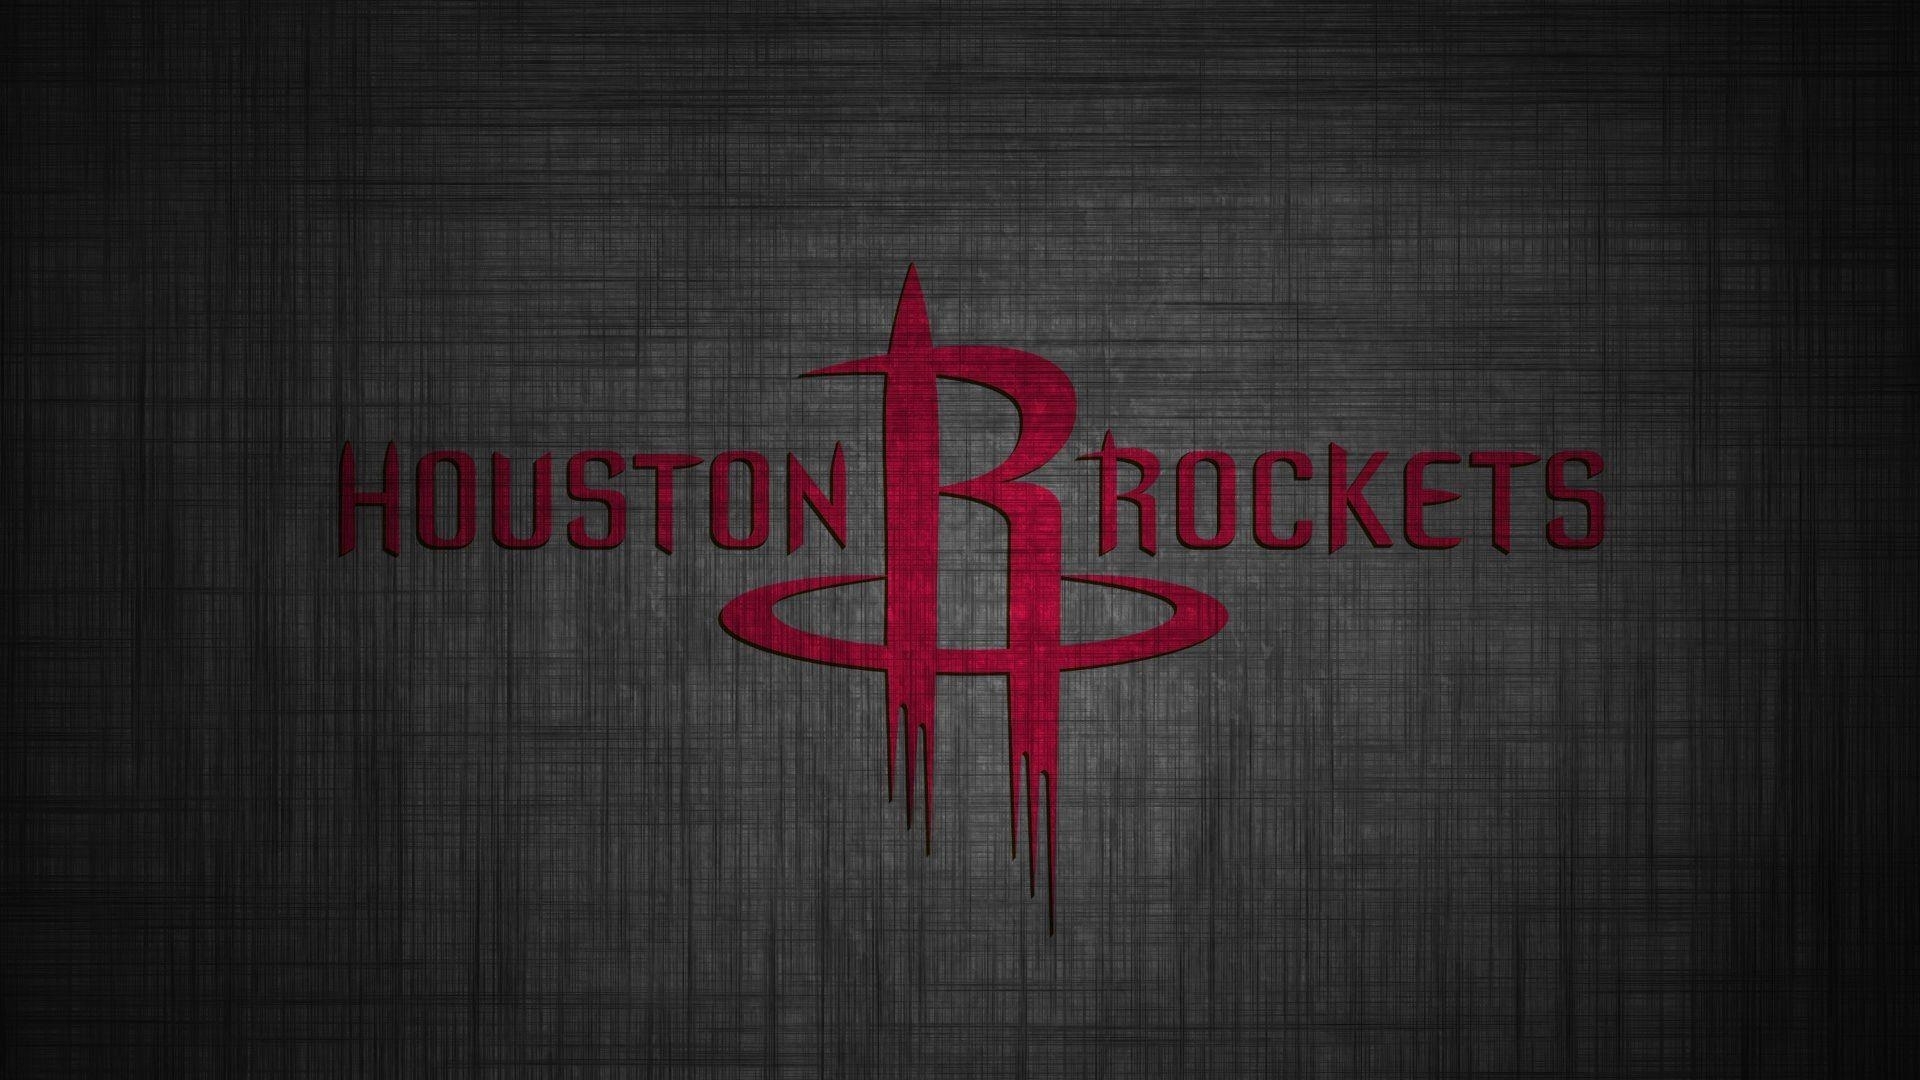 10 New Houston Rockets Wallpaper Hd FULL HD 1080p For PC Background